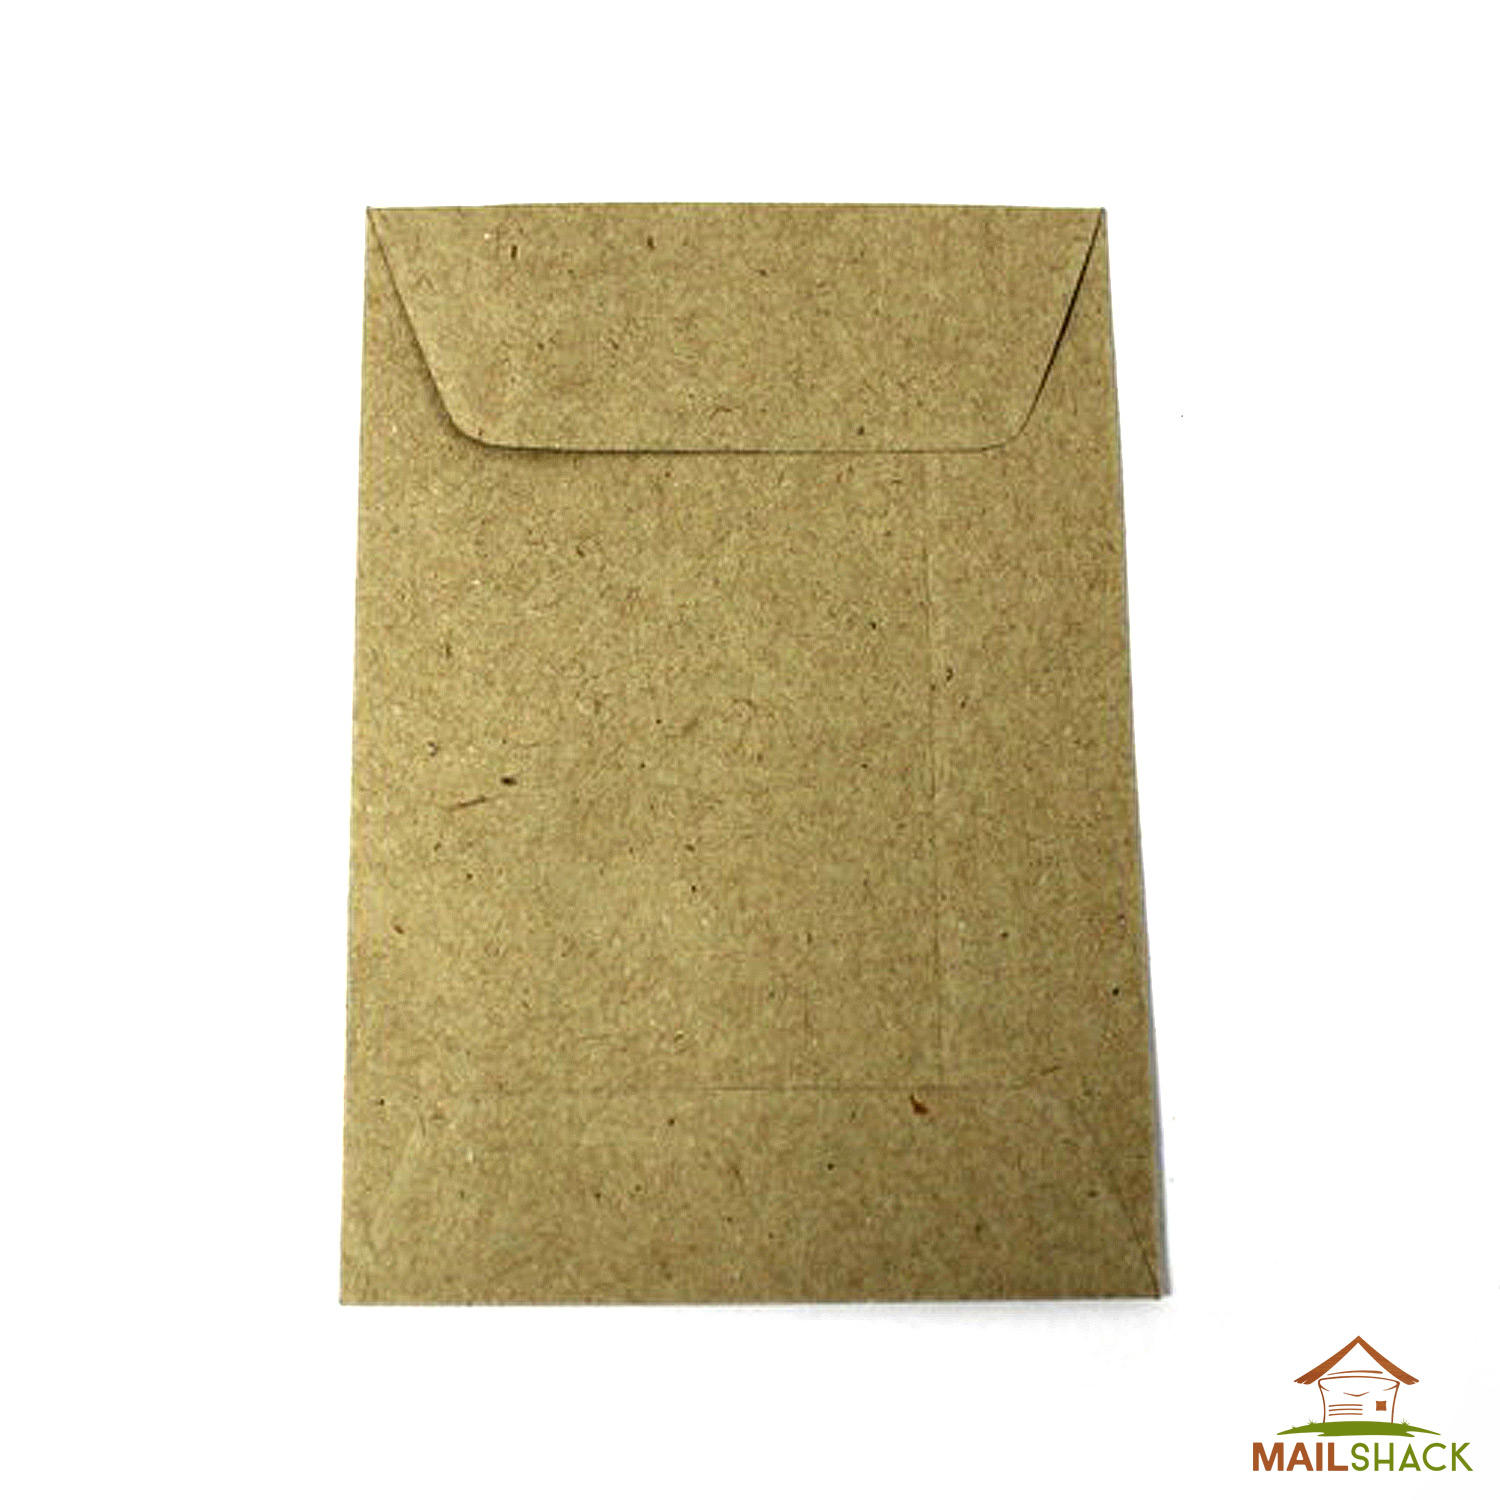 SMALL PLAIN BROWN ENVELOPES DINNER MONEY WAGES GIFT COINS POCKET SEED 100 x 62mm 